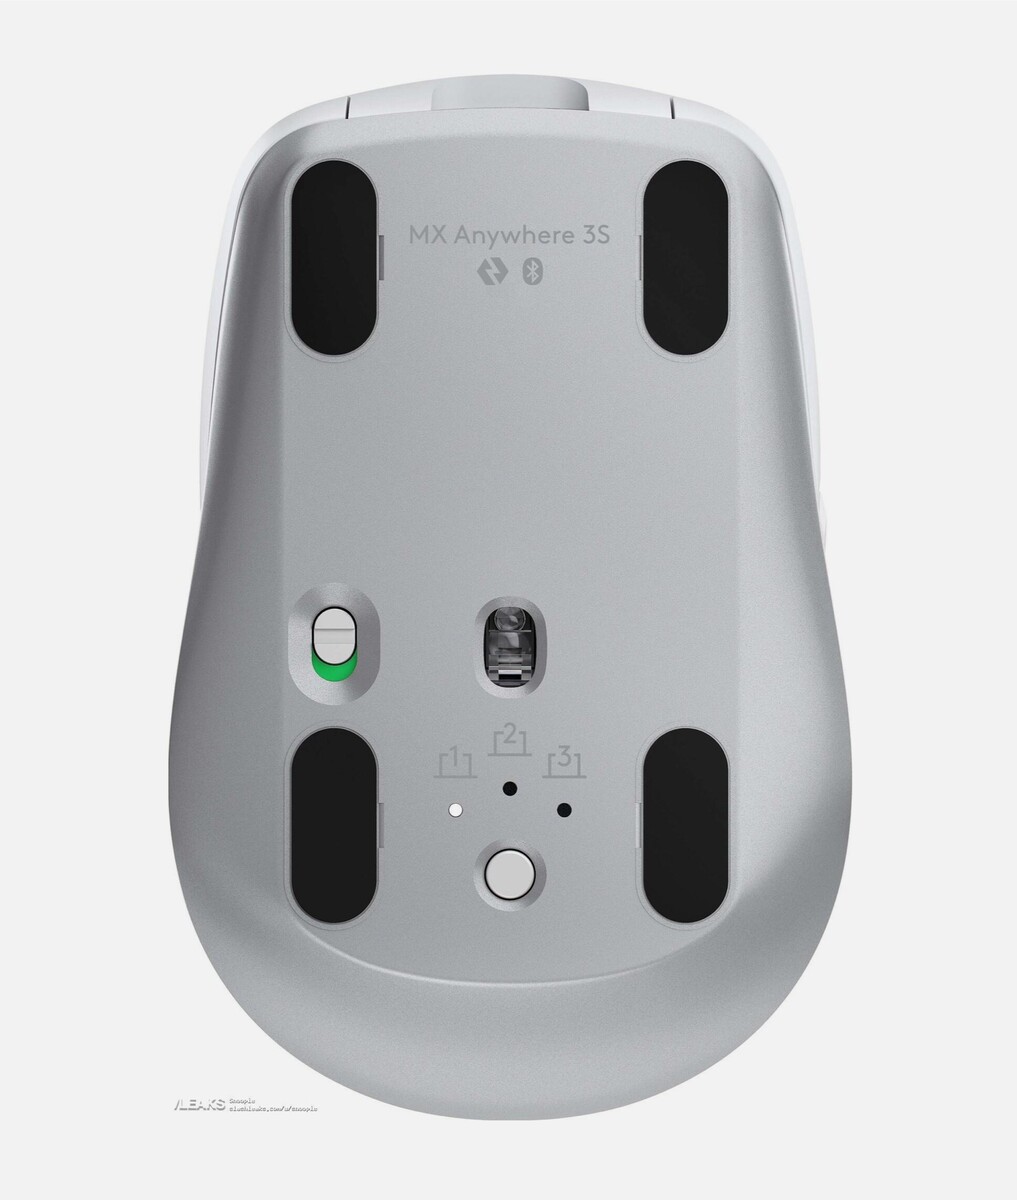 Logitech MX Anywhere 3S leaks as new compact premium mouse in